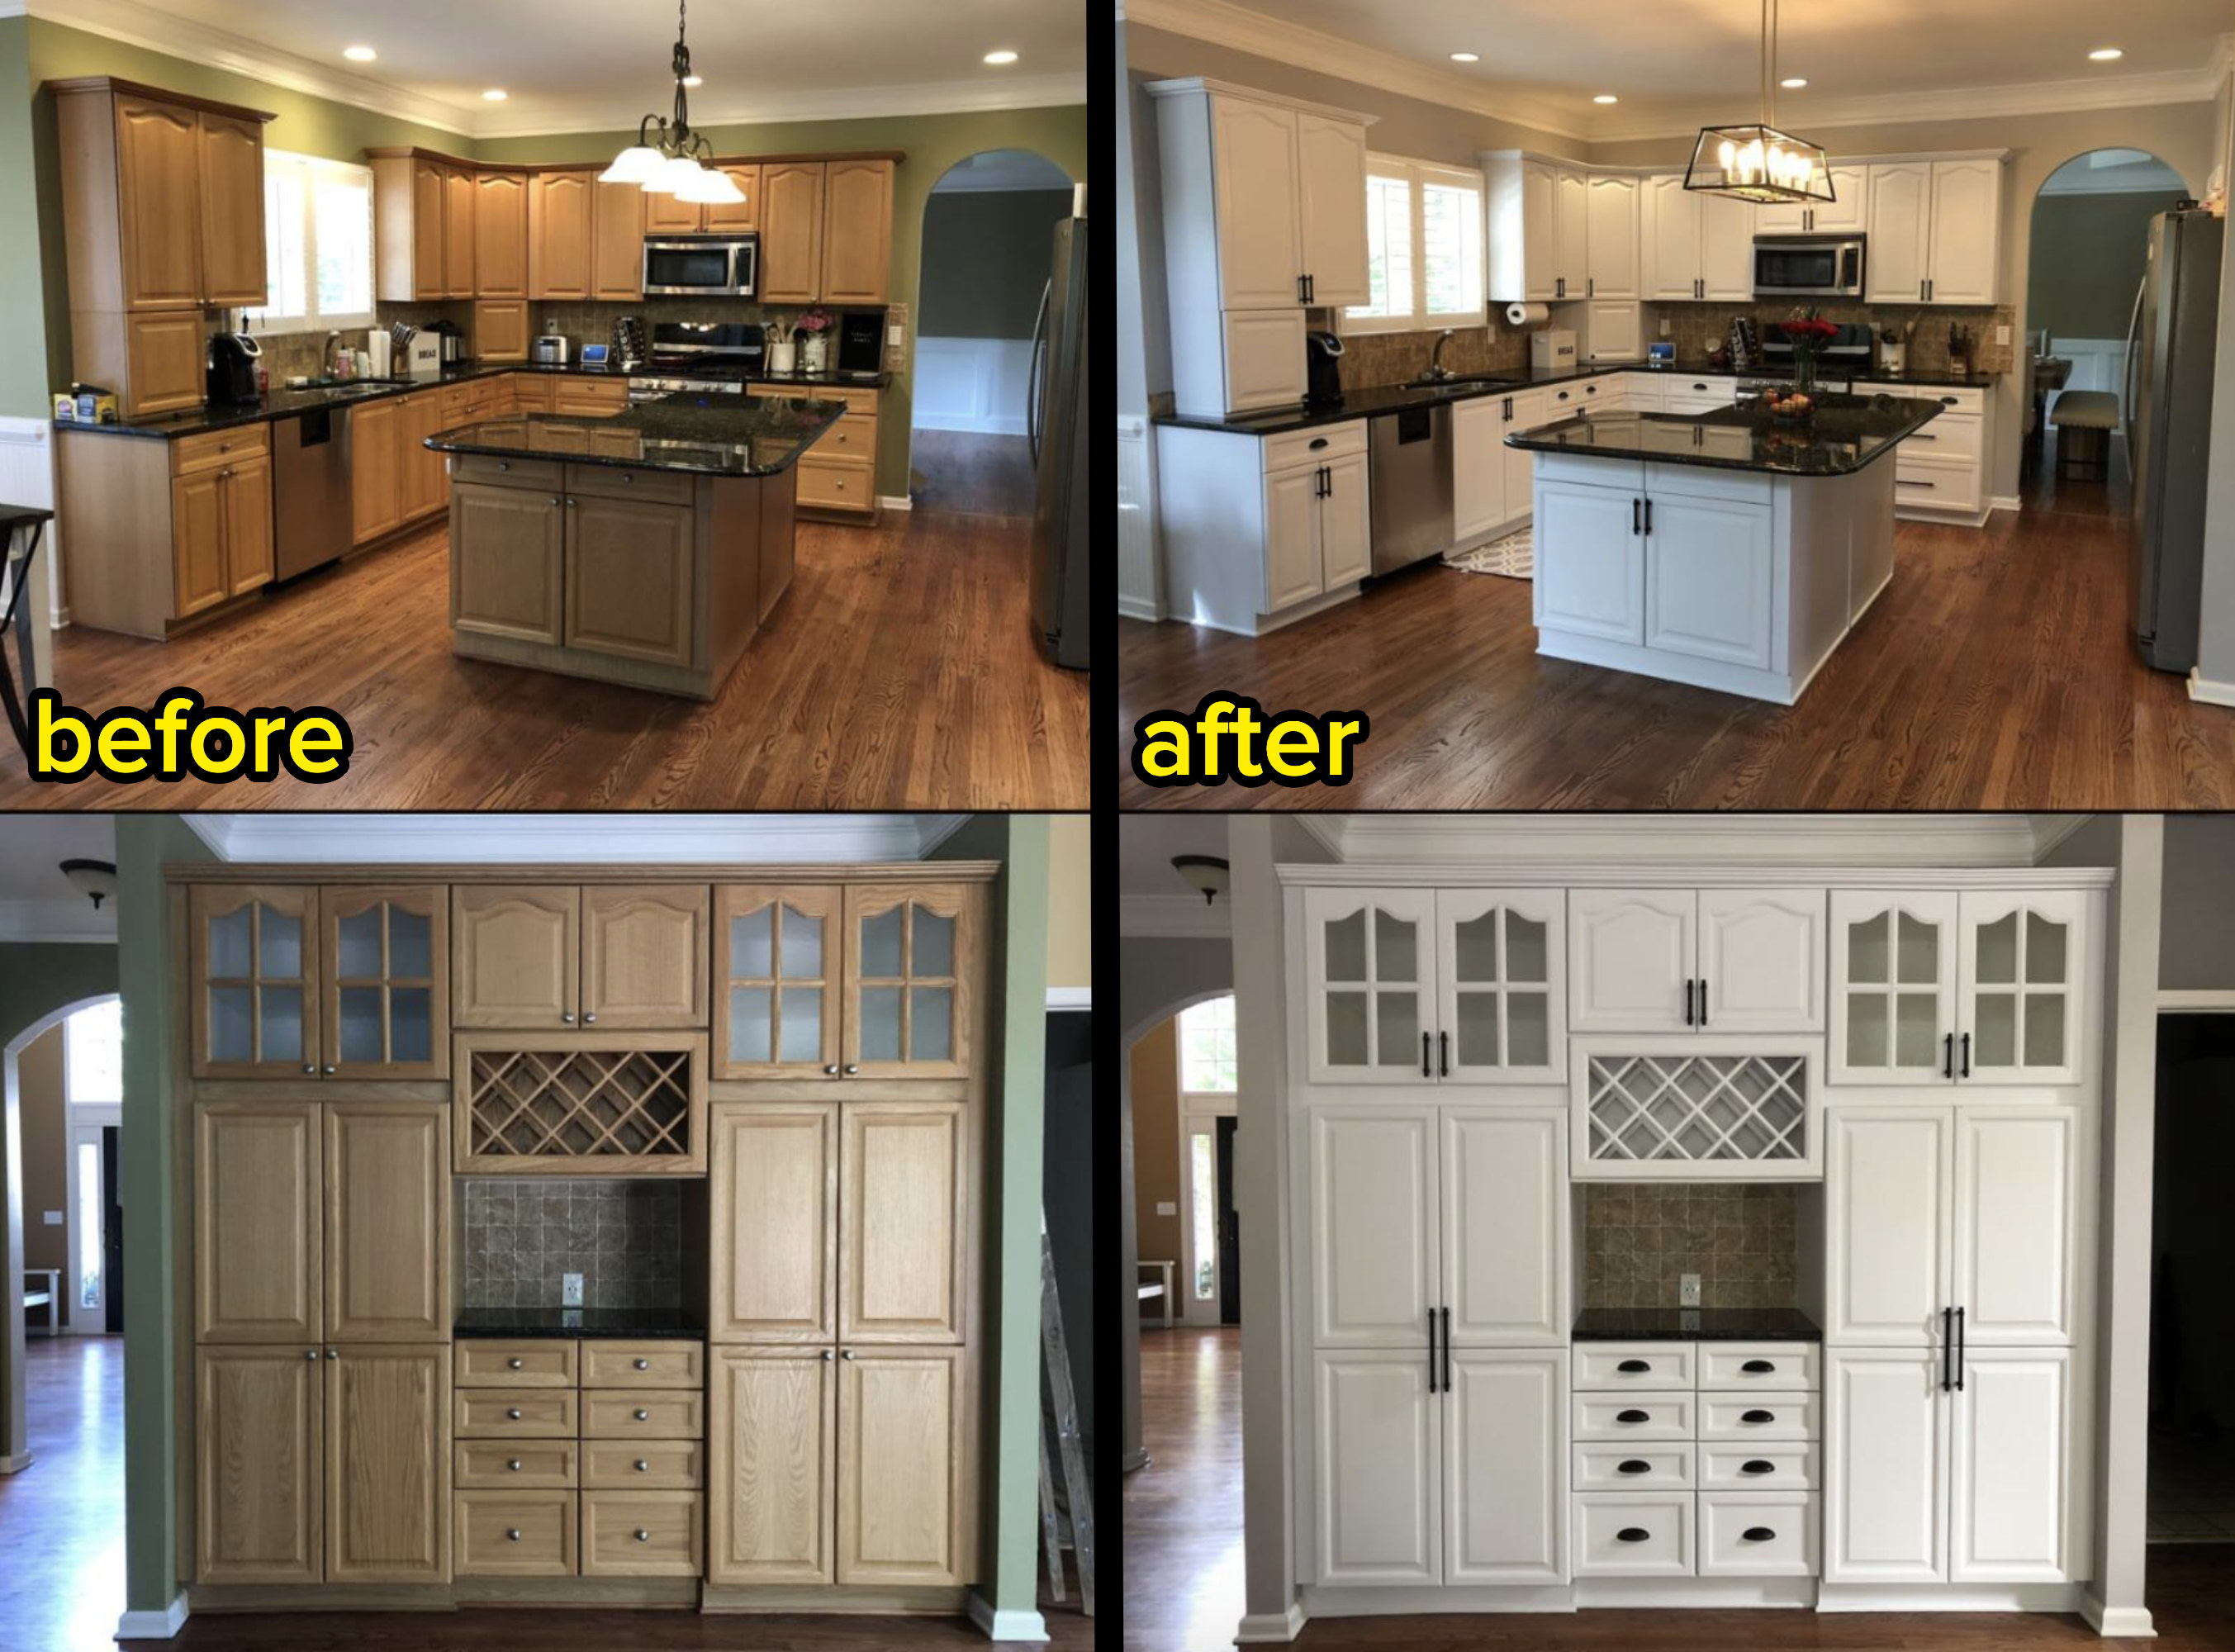 A before and after customer review photo of their wood cabinets painted white